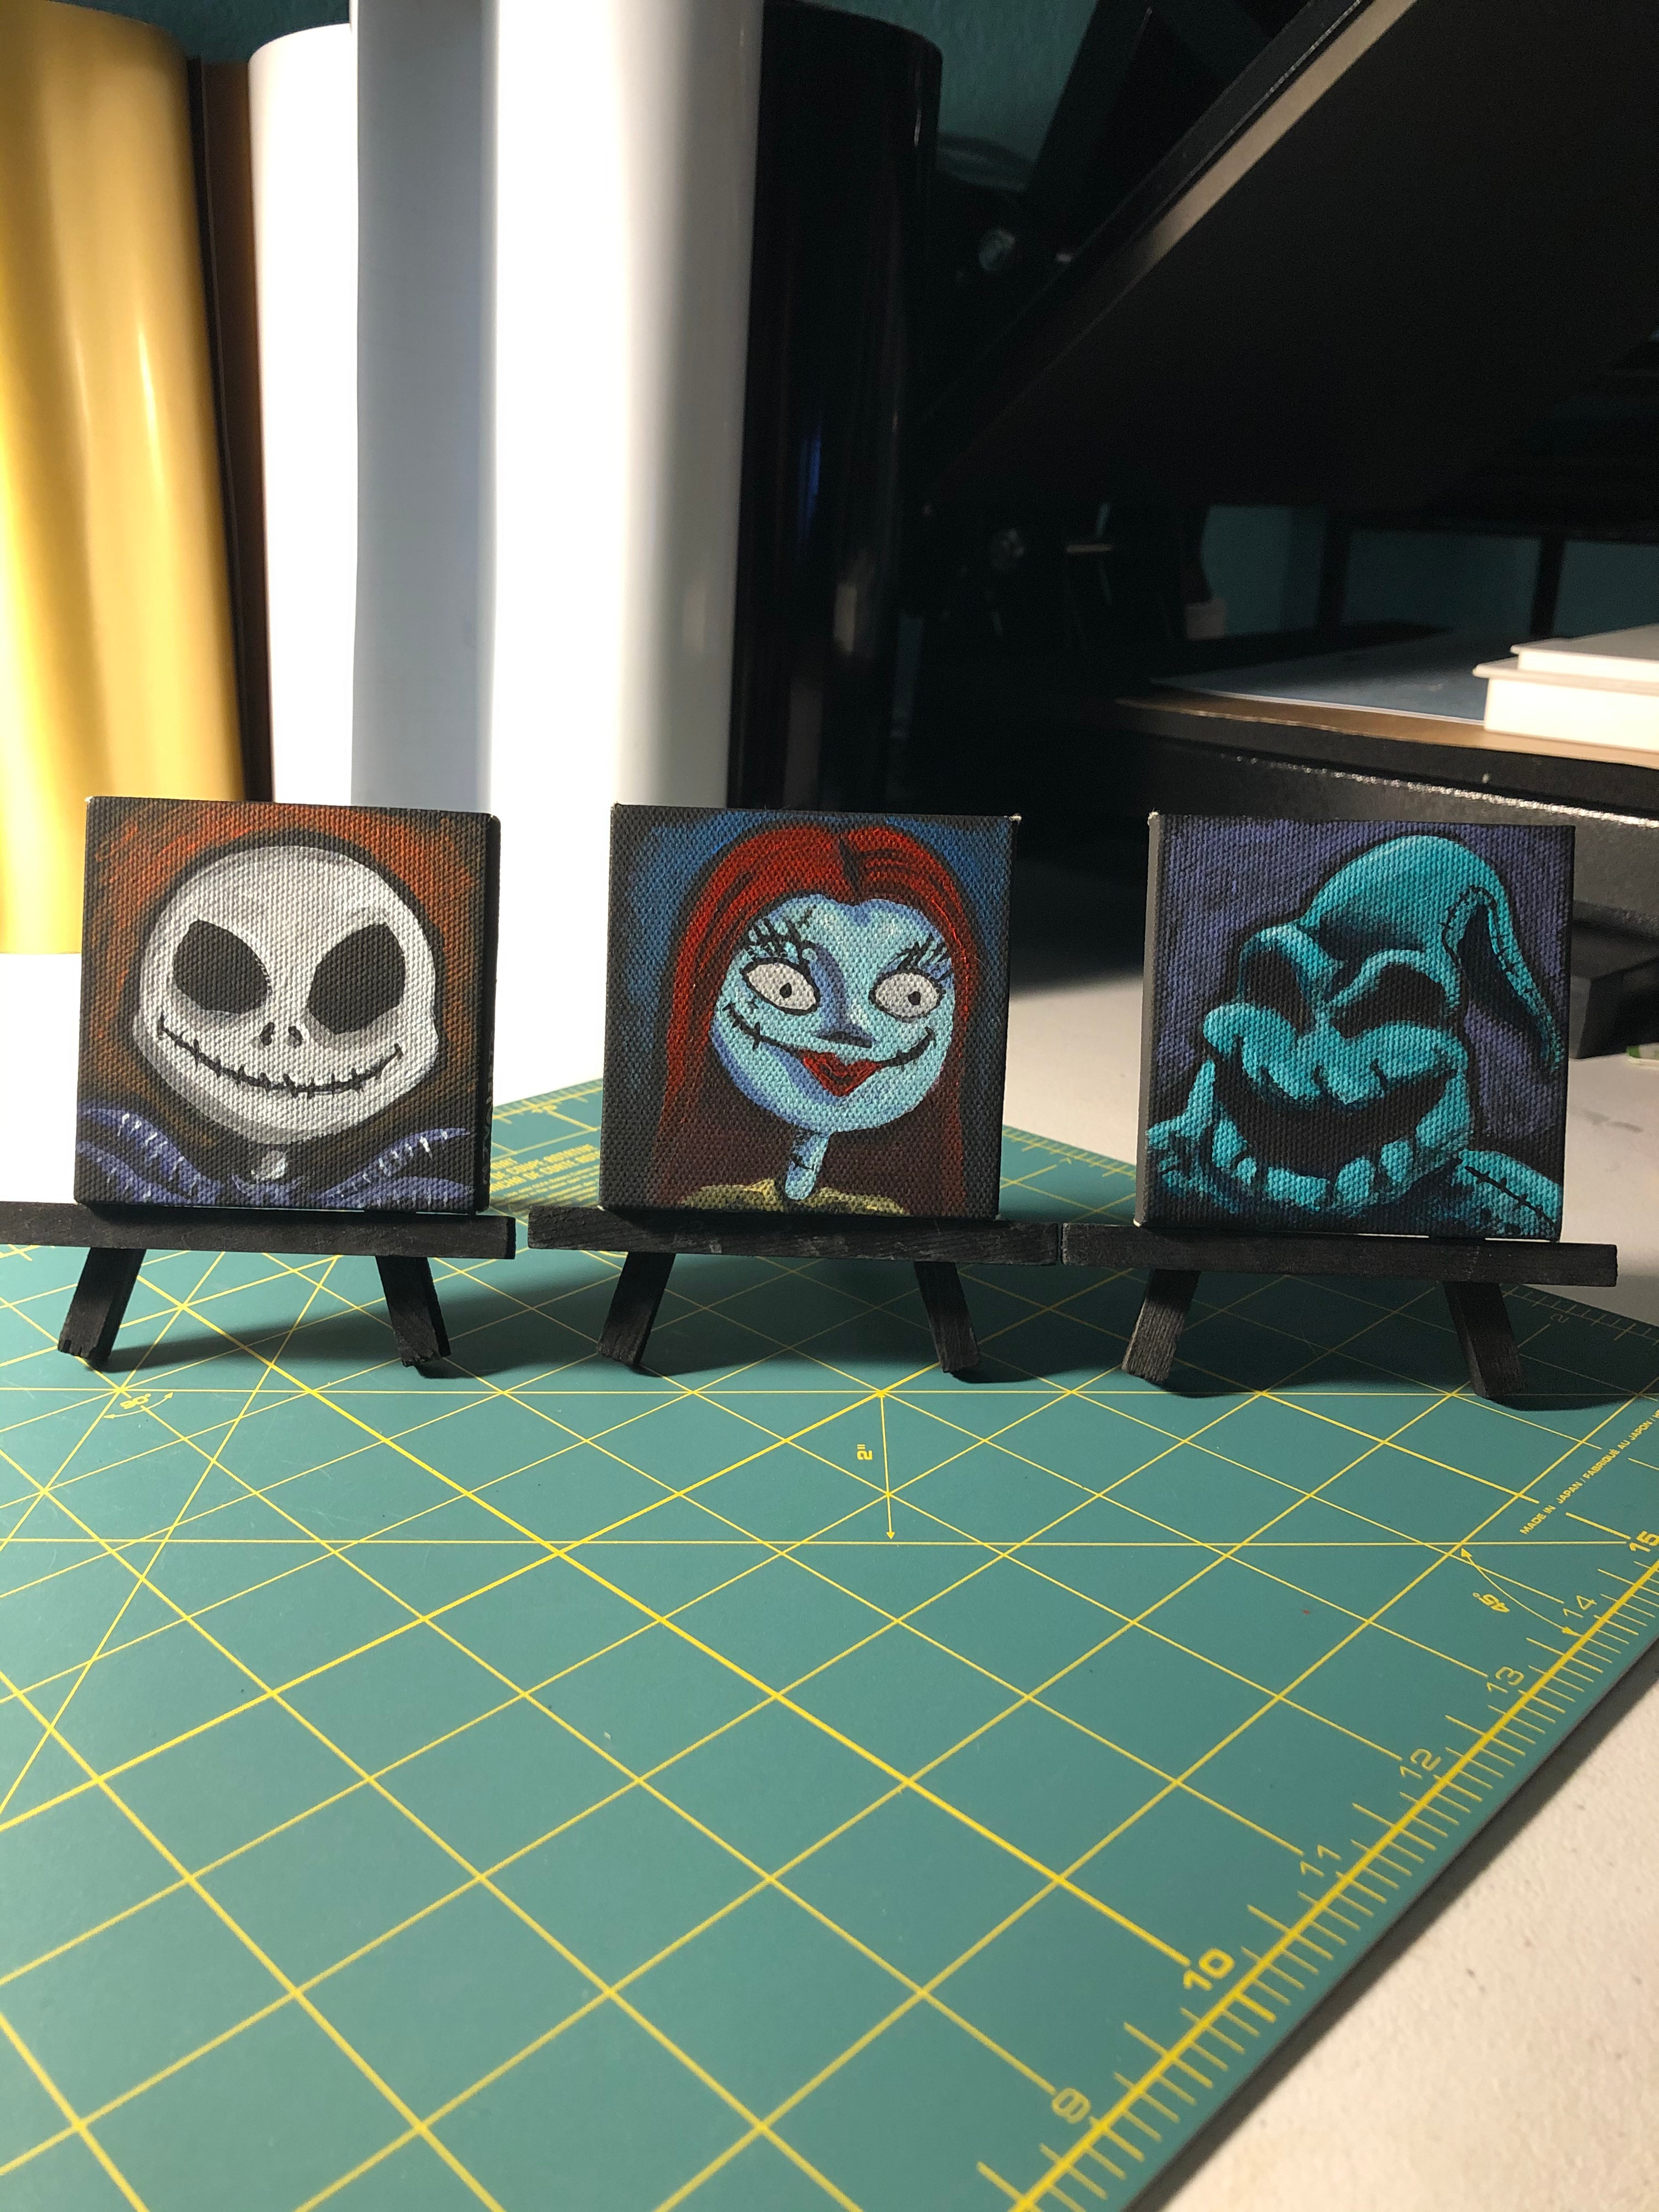 Nightmare Before Christmas, Jack, Sally and Oogie Boogie. Acrylic paintings on black mini canvas, 3x3 in.